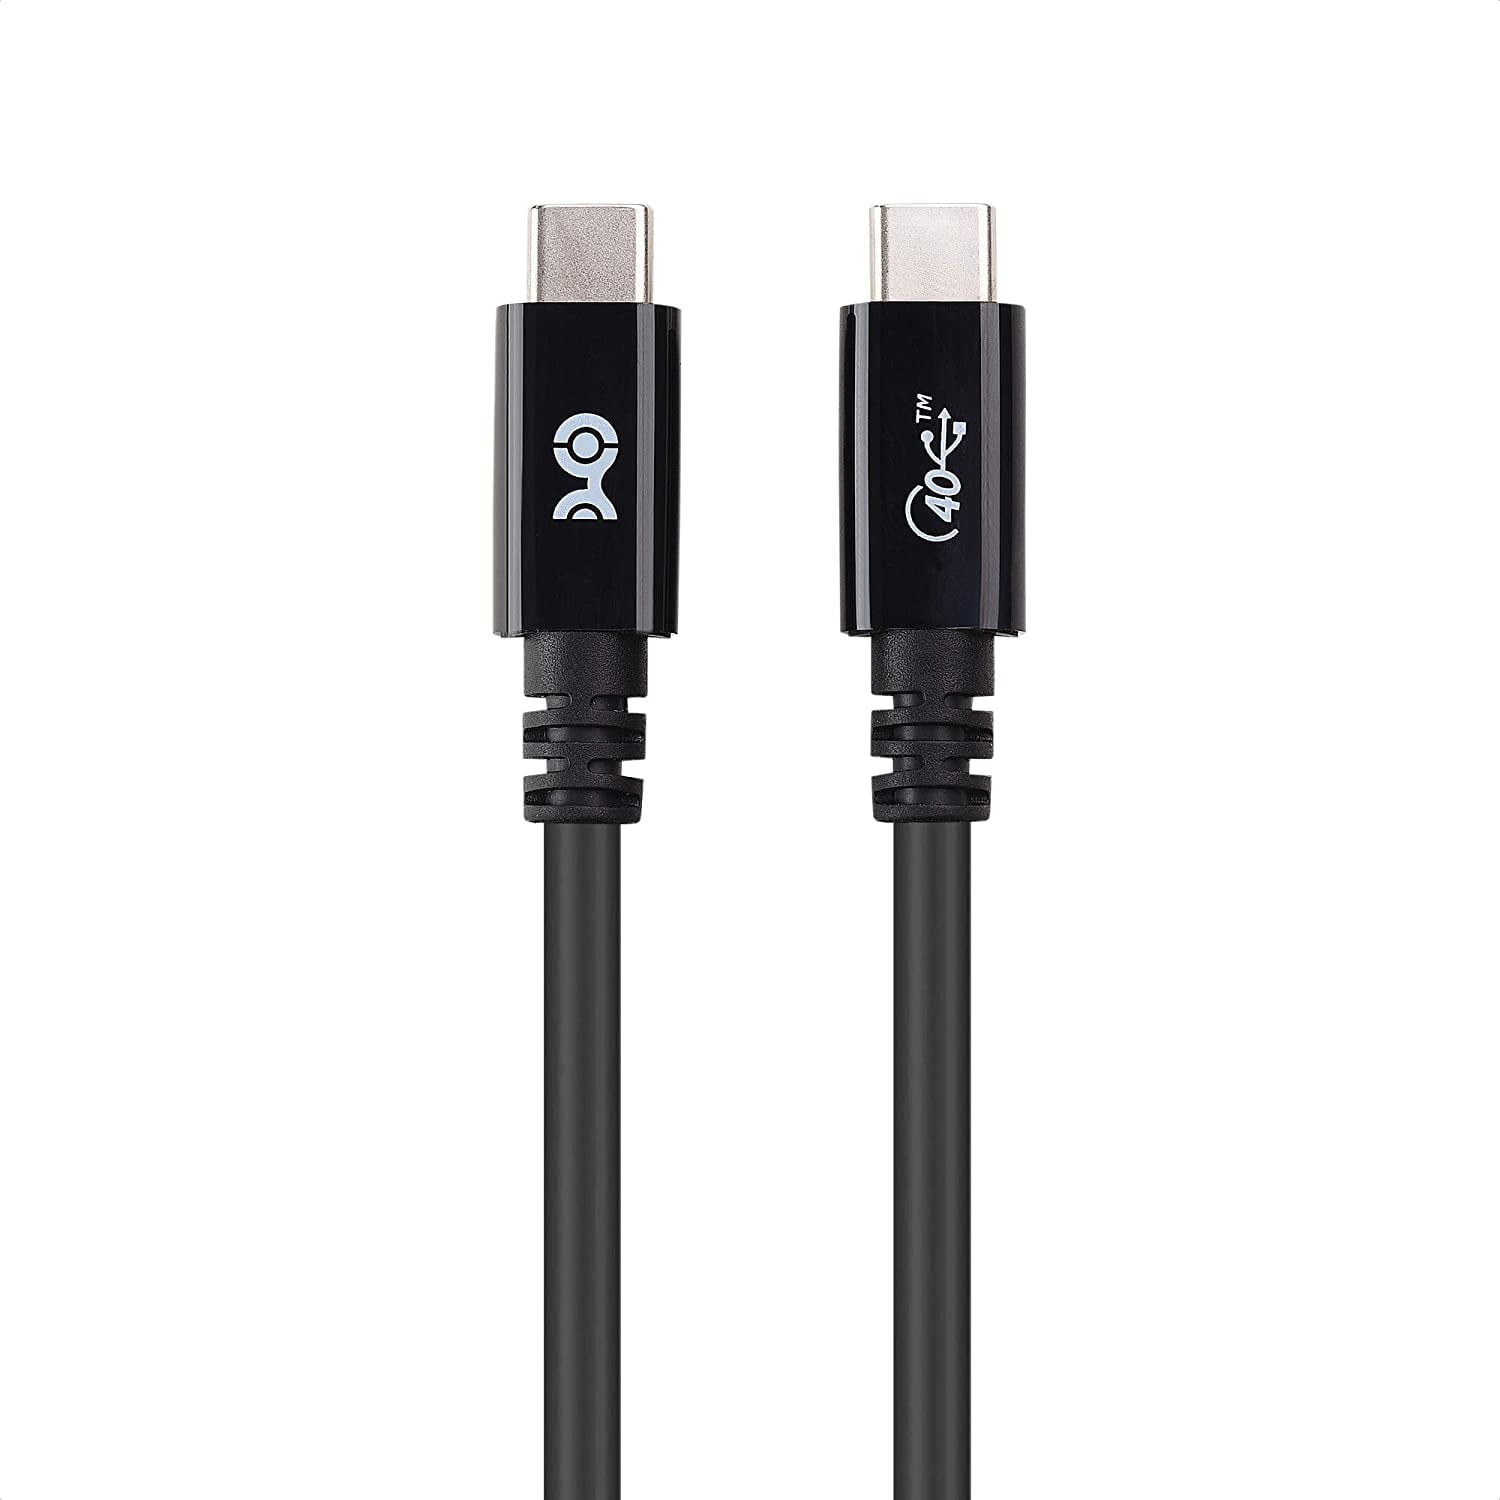 TruePower 1 m USB-C to Lightning Cable (4-pack) CL0014 - The Home Depot